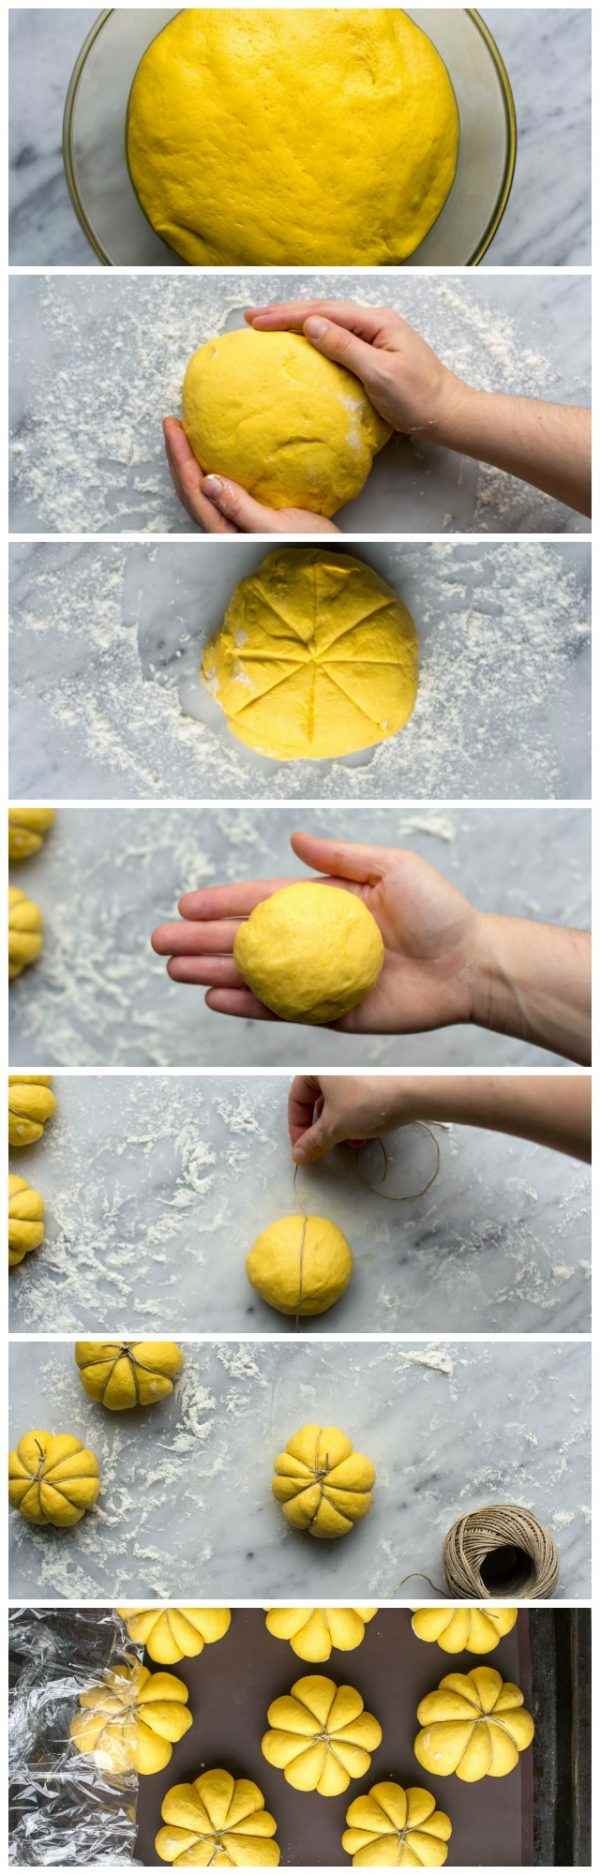 How to make Pumpkin Shaped Bread Rolls step by step